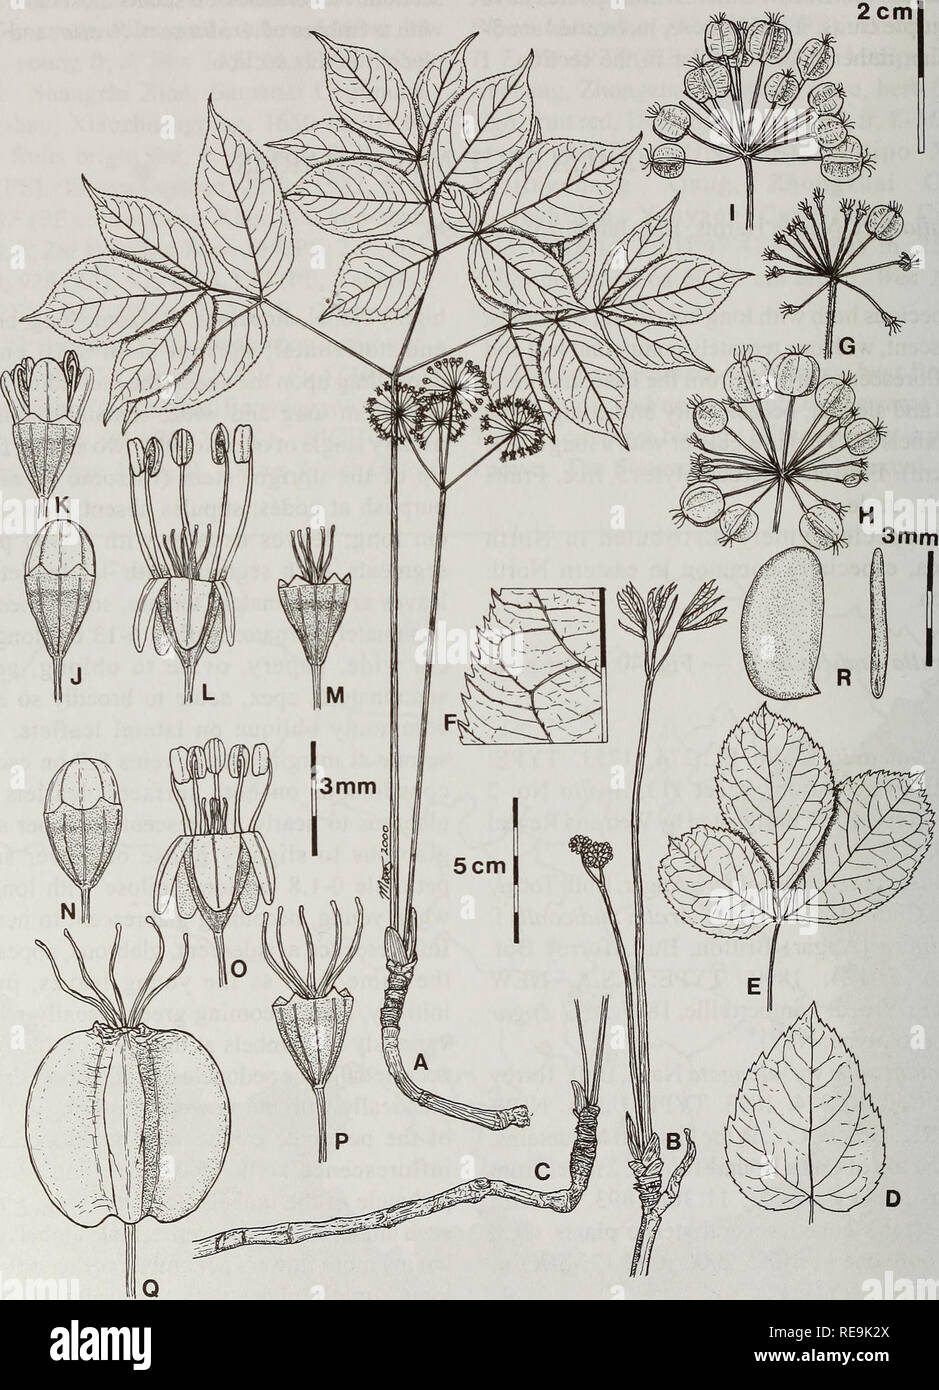 . Contributions from the United States National Herbarium. Botany. 110 Systematics of Aralia 2cm!. 40. Aralia nudicaulis L. A. Habit with leaf, inflorescence and rhizome. B. Young inflorescence appearing at the same time as the leaf opens. C. Horizonal rhizome, upright rhizome, bract at the base of leaf and inflorescence. D. Leaflet. E. Leaf segment. F. Leaflet margin. G. Female umbel. H&amp;I. Umbels with fruits. J. Male floral bud. K. Opening male flower. L. Male flower. M. Male flower after anthesis. N. Female floral bud. O. Female flower. P. Female flower after anthesis. Q. Fruit.. Please  Stock Photo